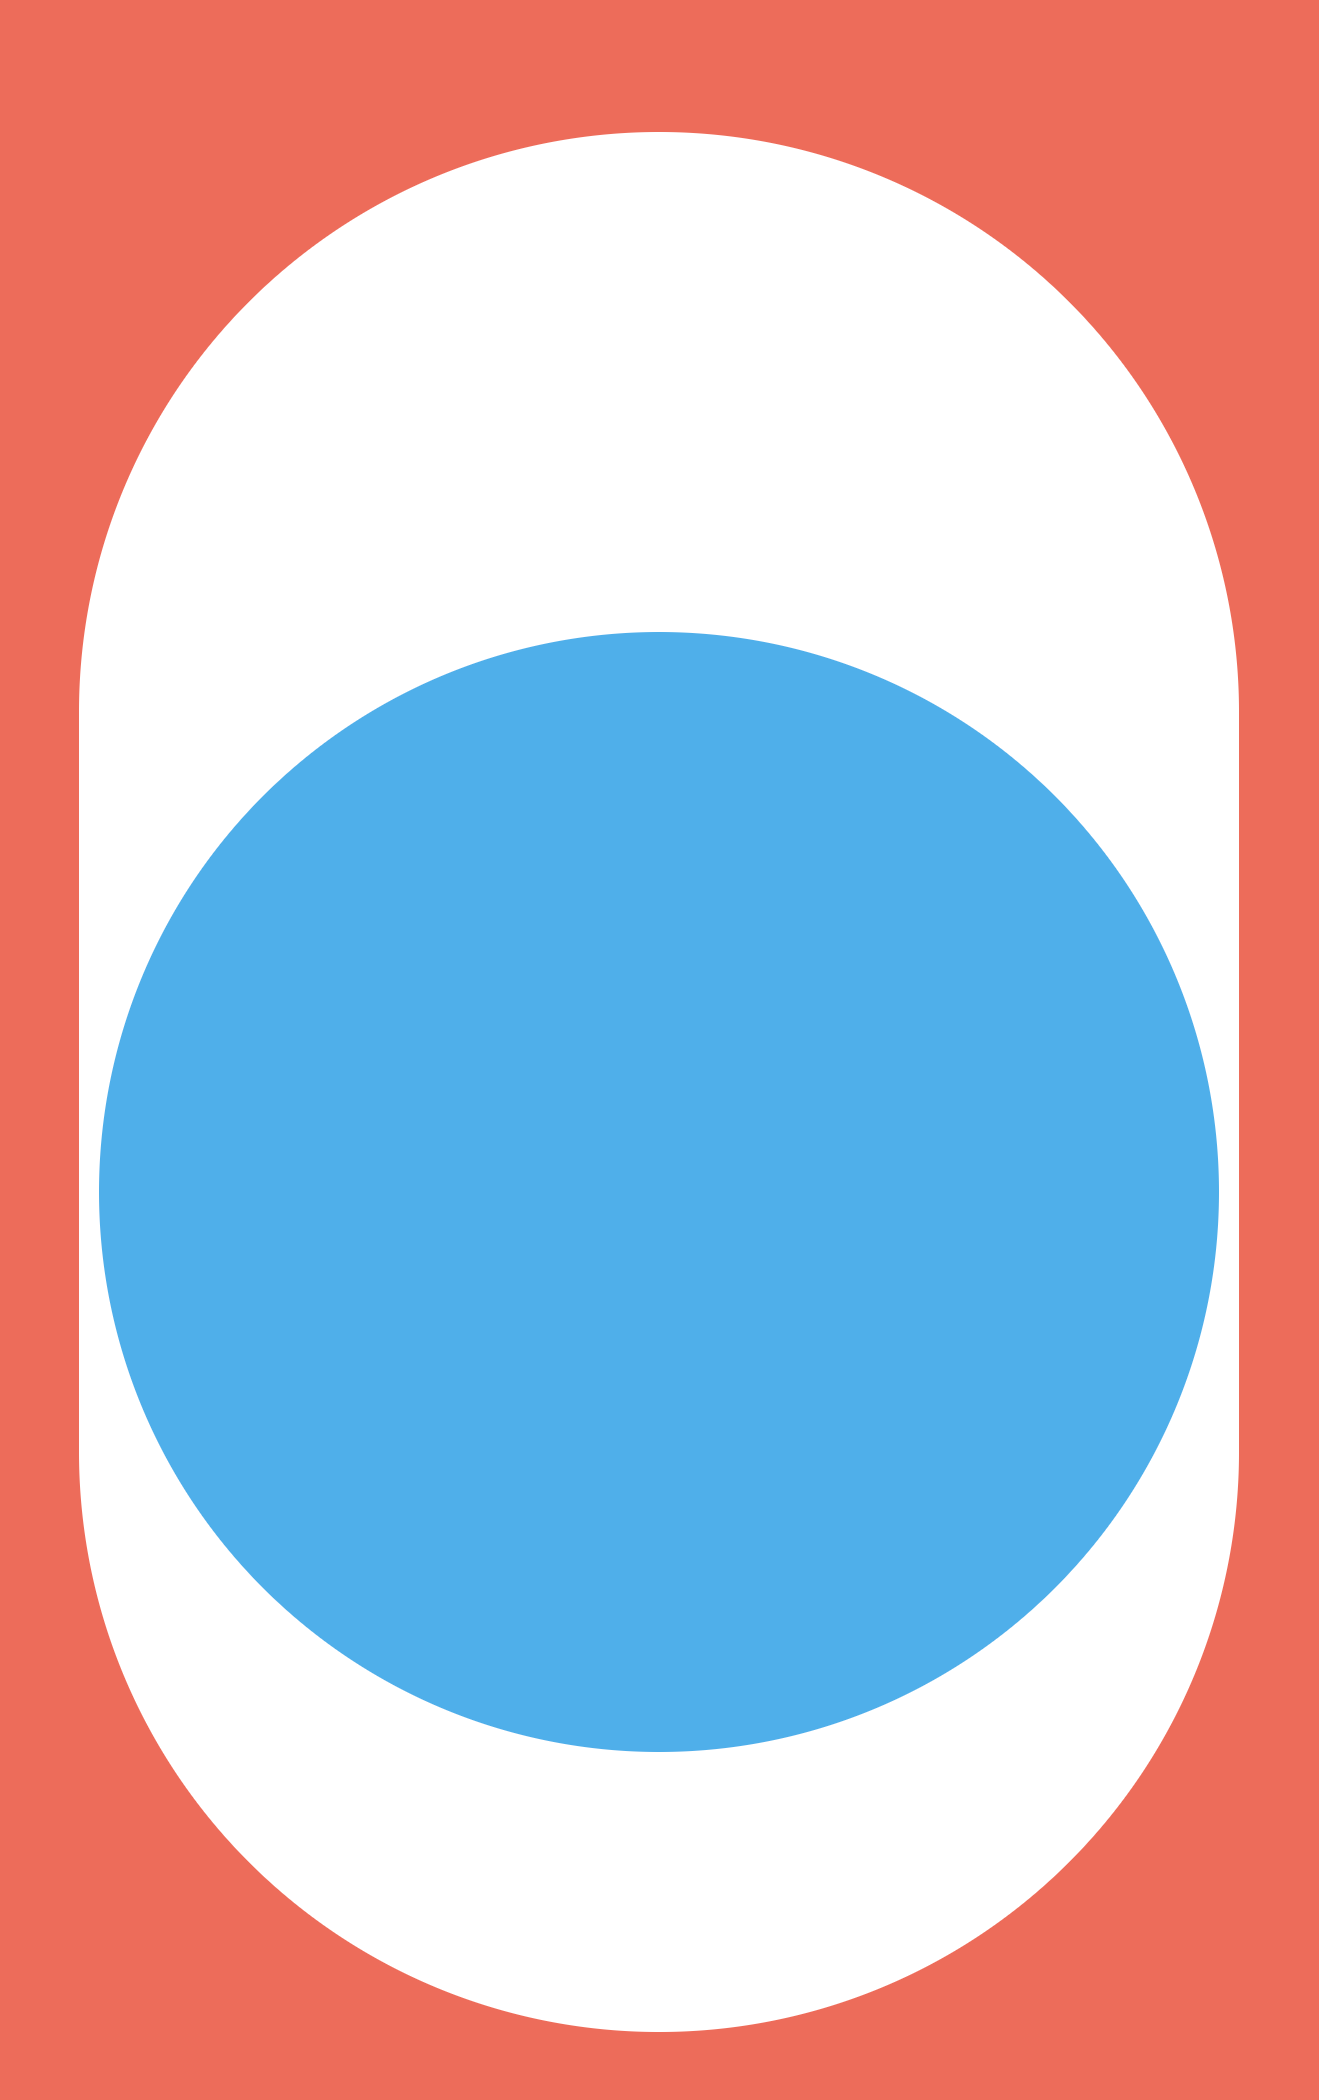 Orange rectangle with a white oblong inside of it and a light blue circle in the very inside.